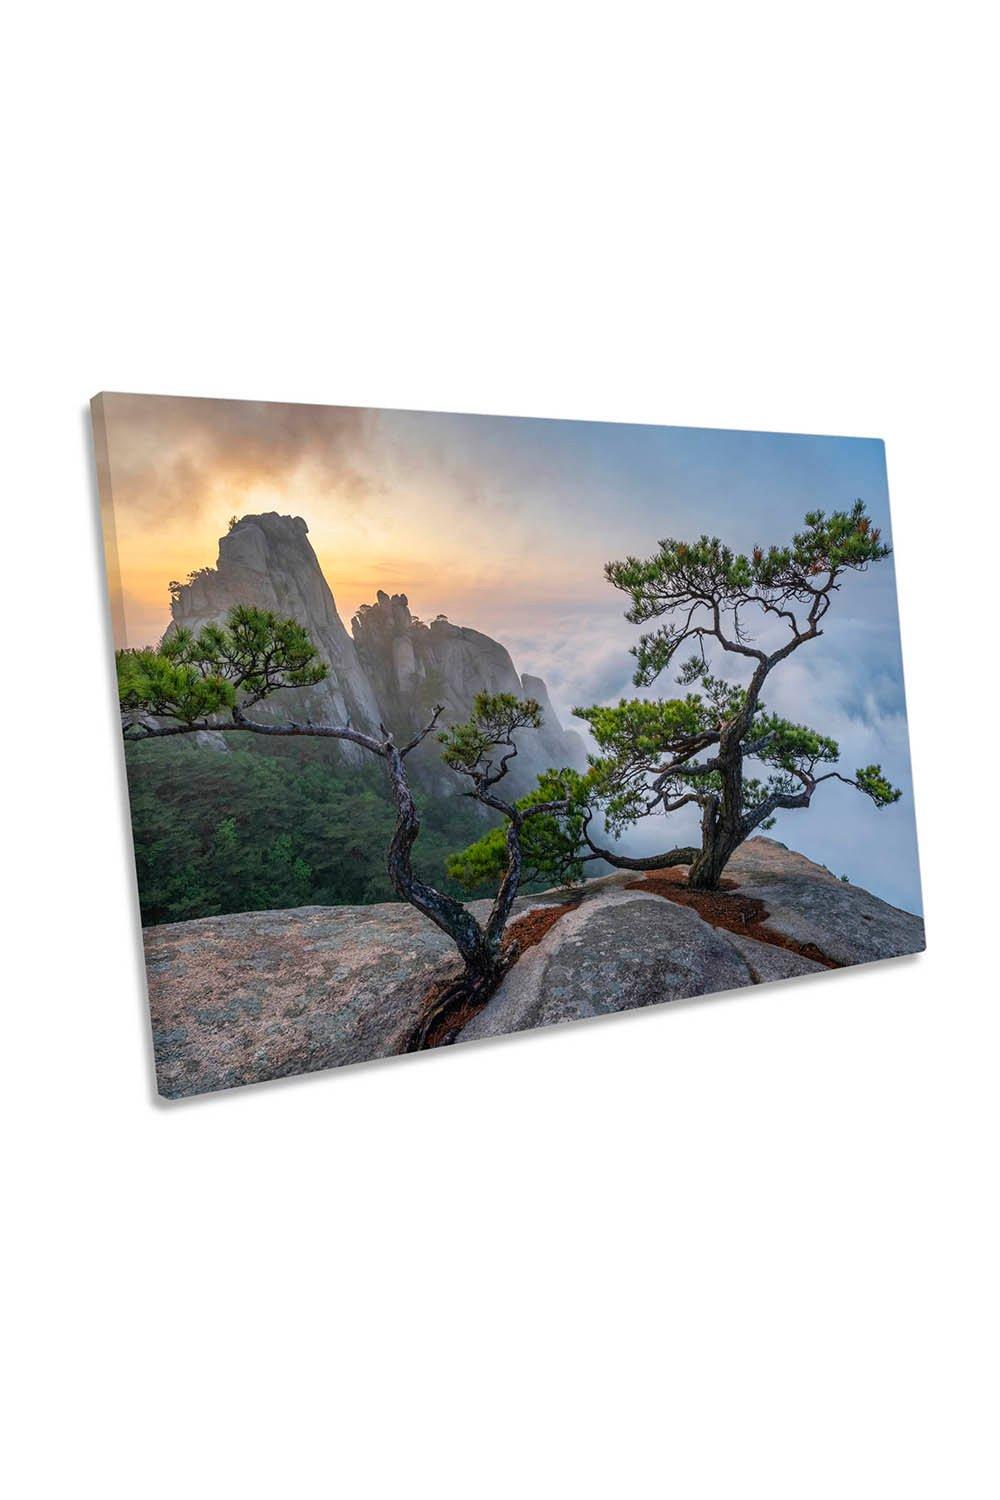 Dancing Trees of Eden Korean Mountains Canvas Wall Art Picture Print